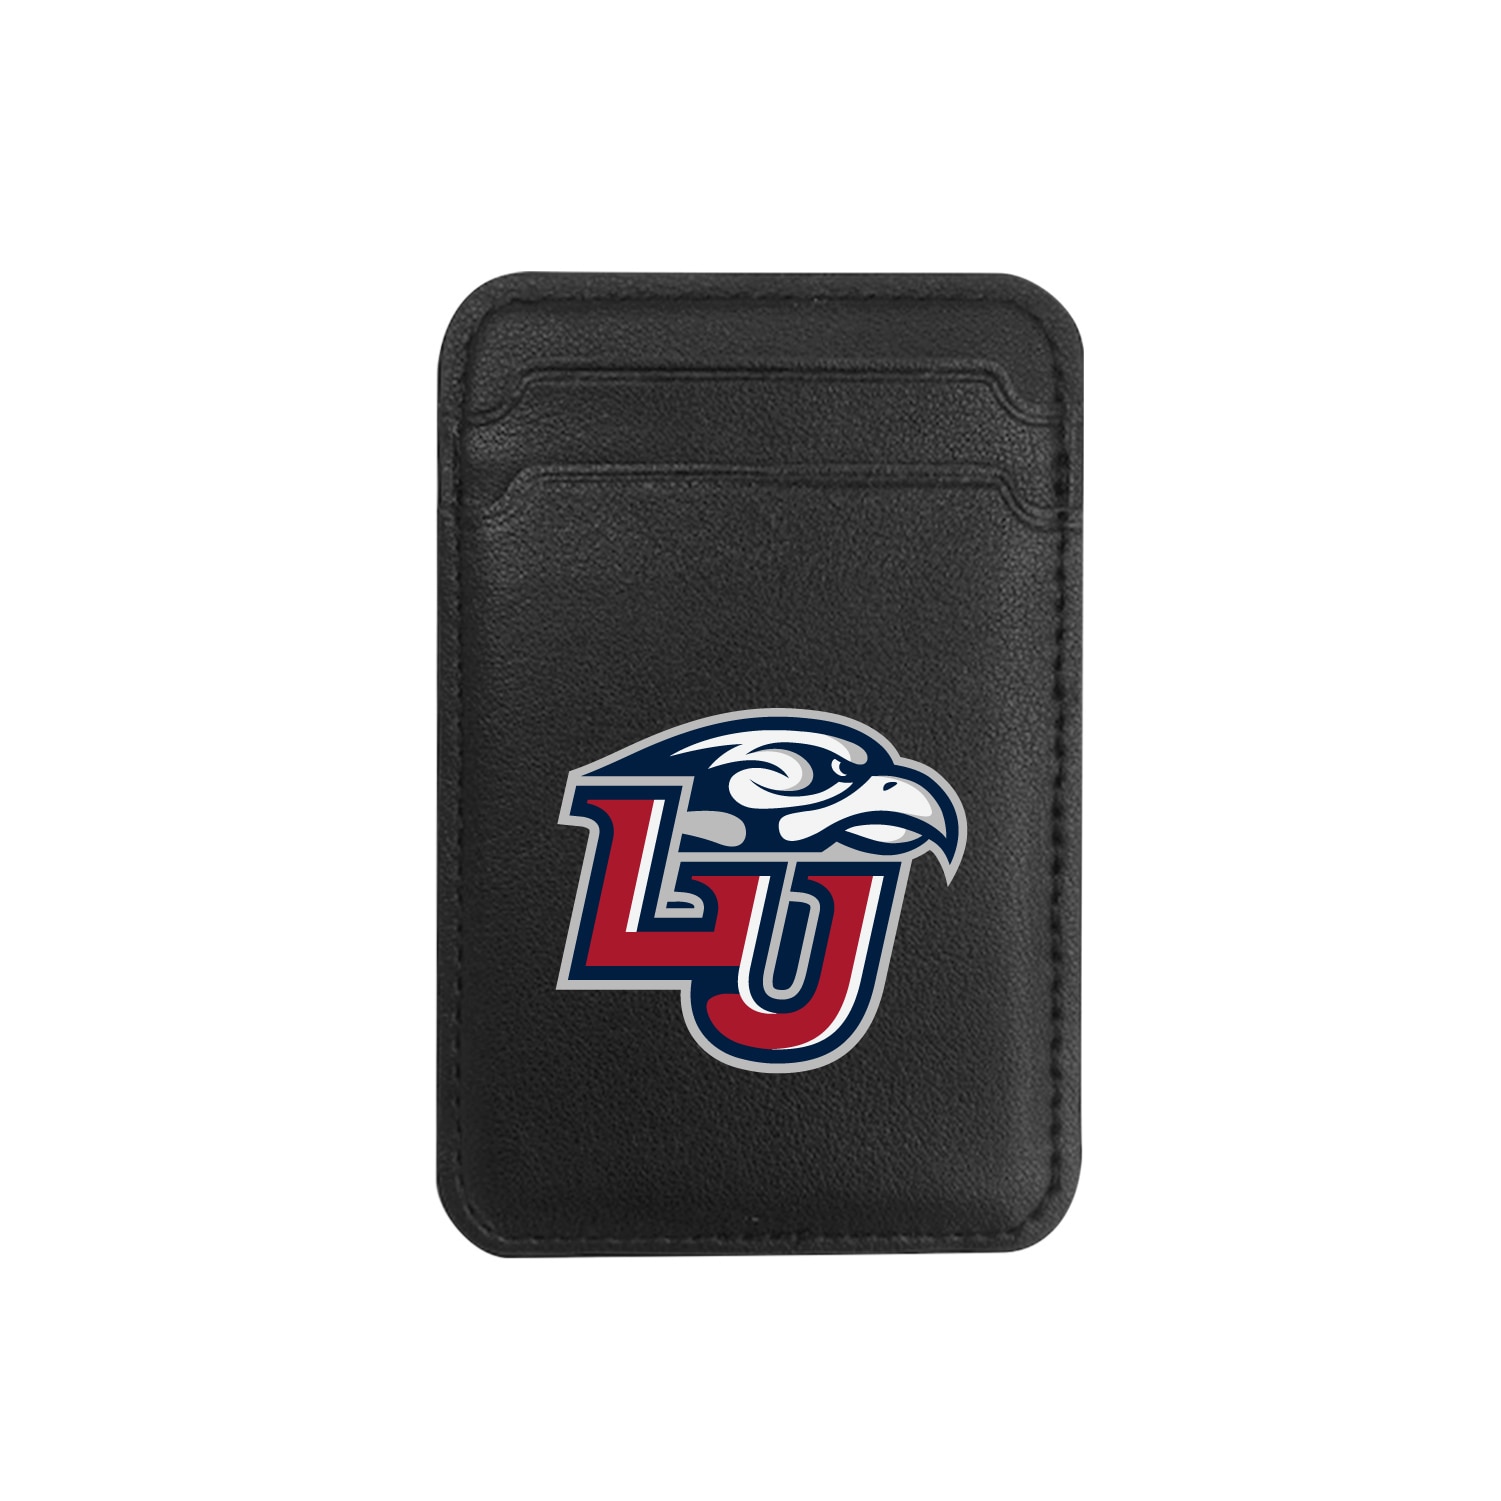 Liberty University - Leather Wallet Sleeve (Top Load, Mag Safe), Black, Classic V1